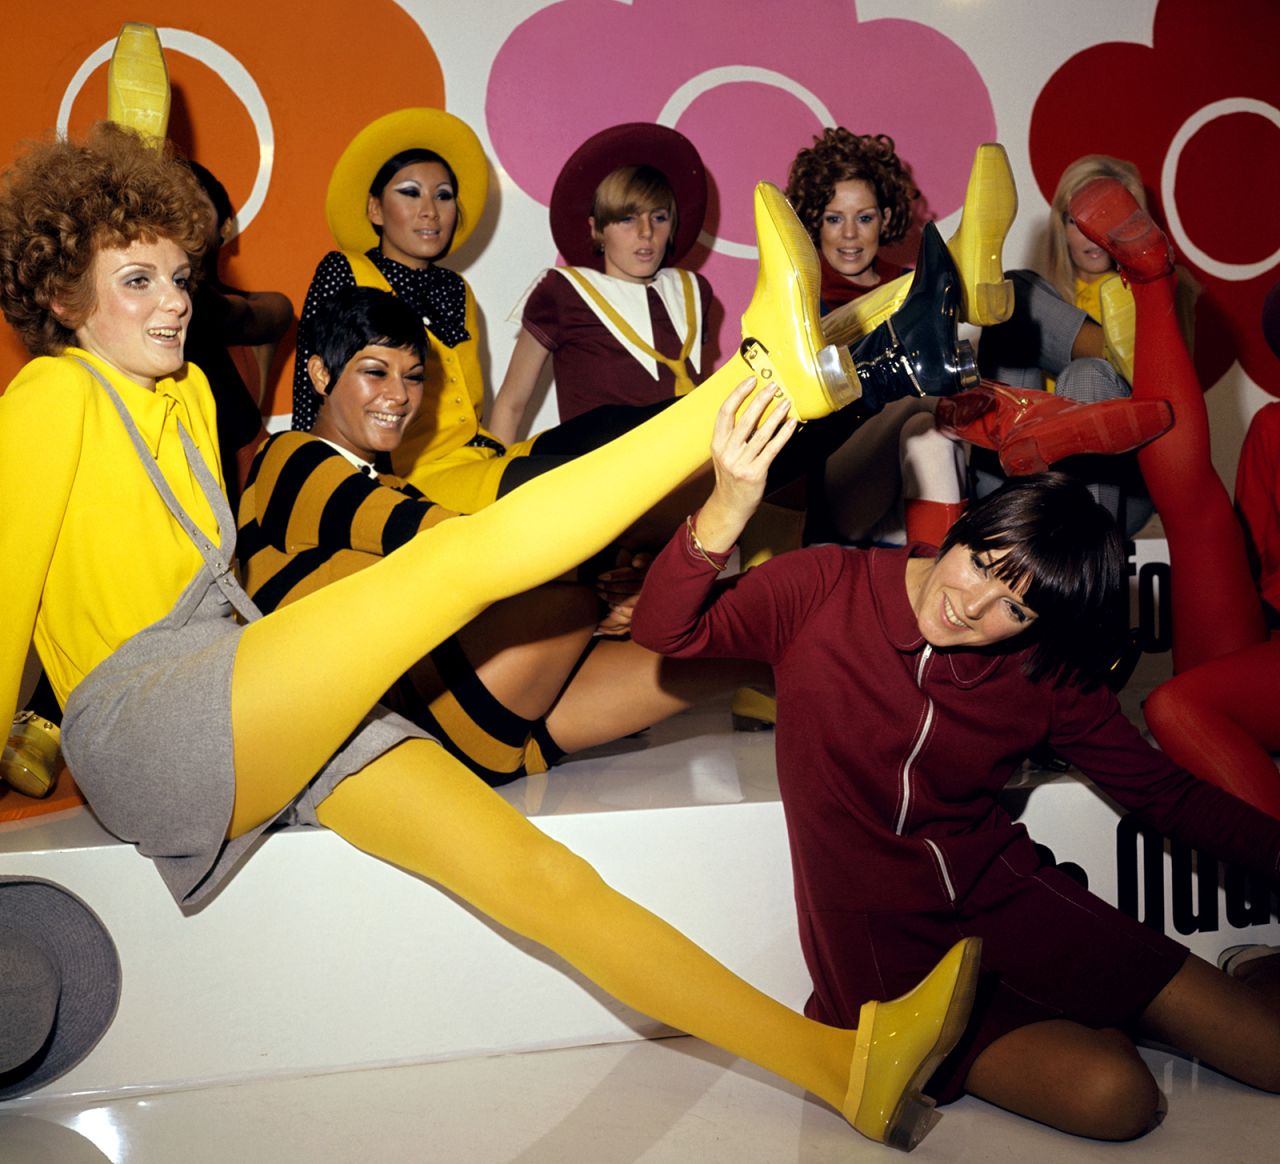 Whimsical colorful tights were populairzed by the late British designer Mary Quant.